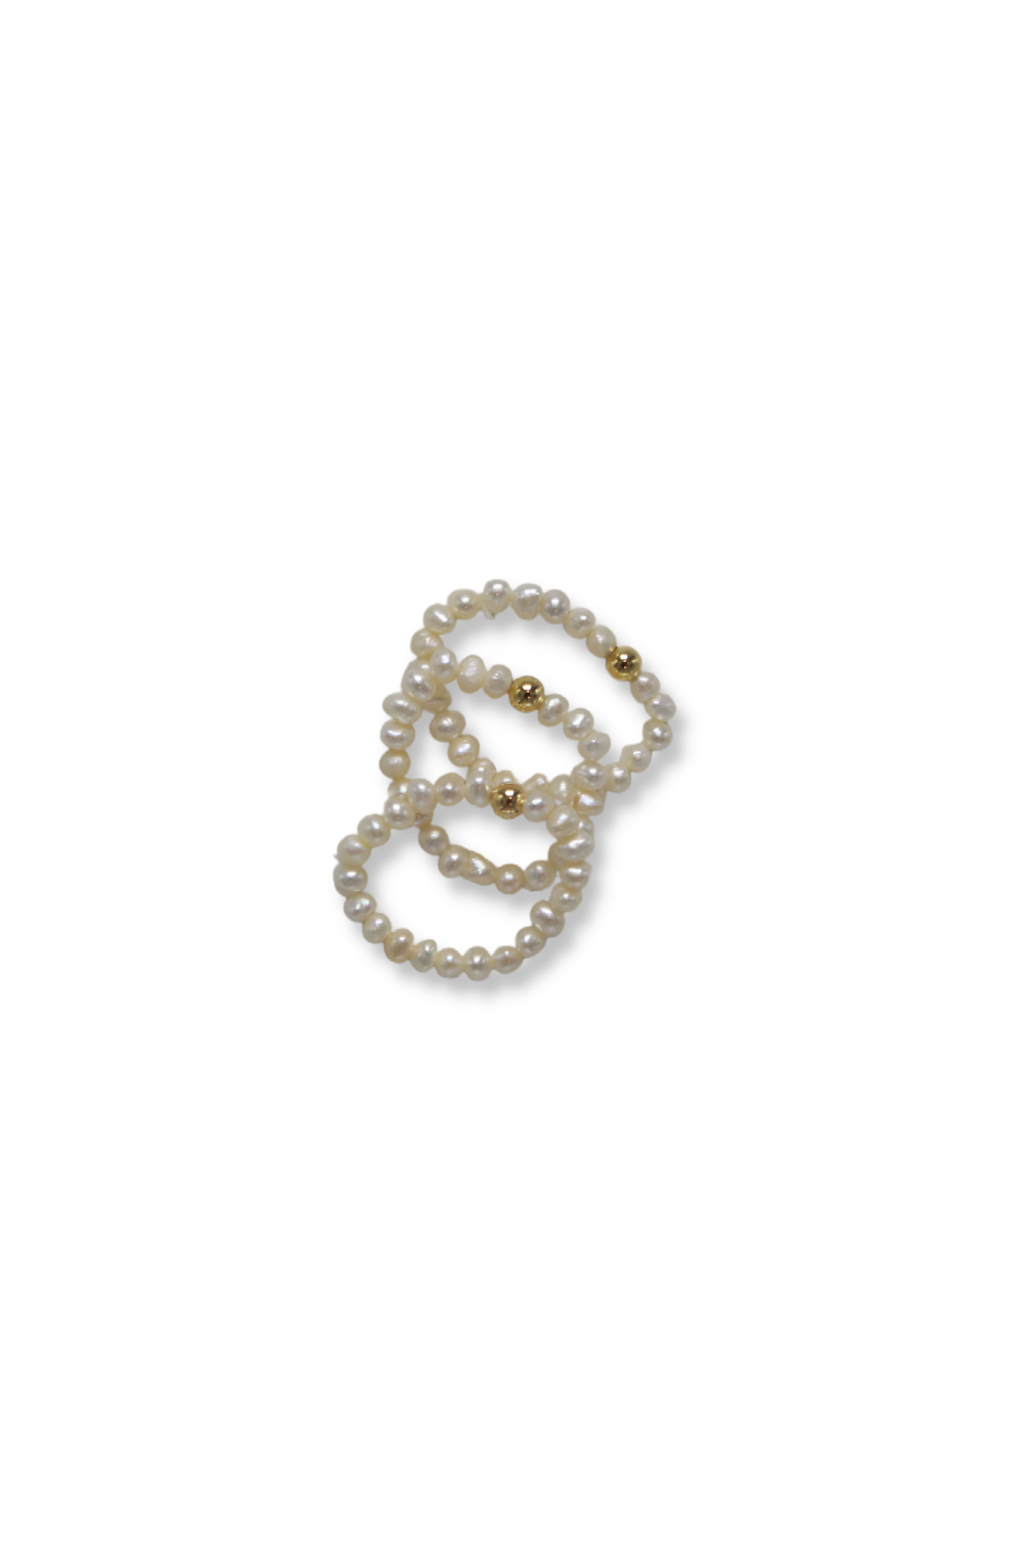 Circle of Pearls Ring by Annie Claire Designs - SoSis